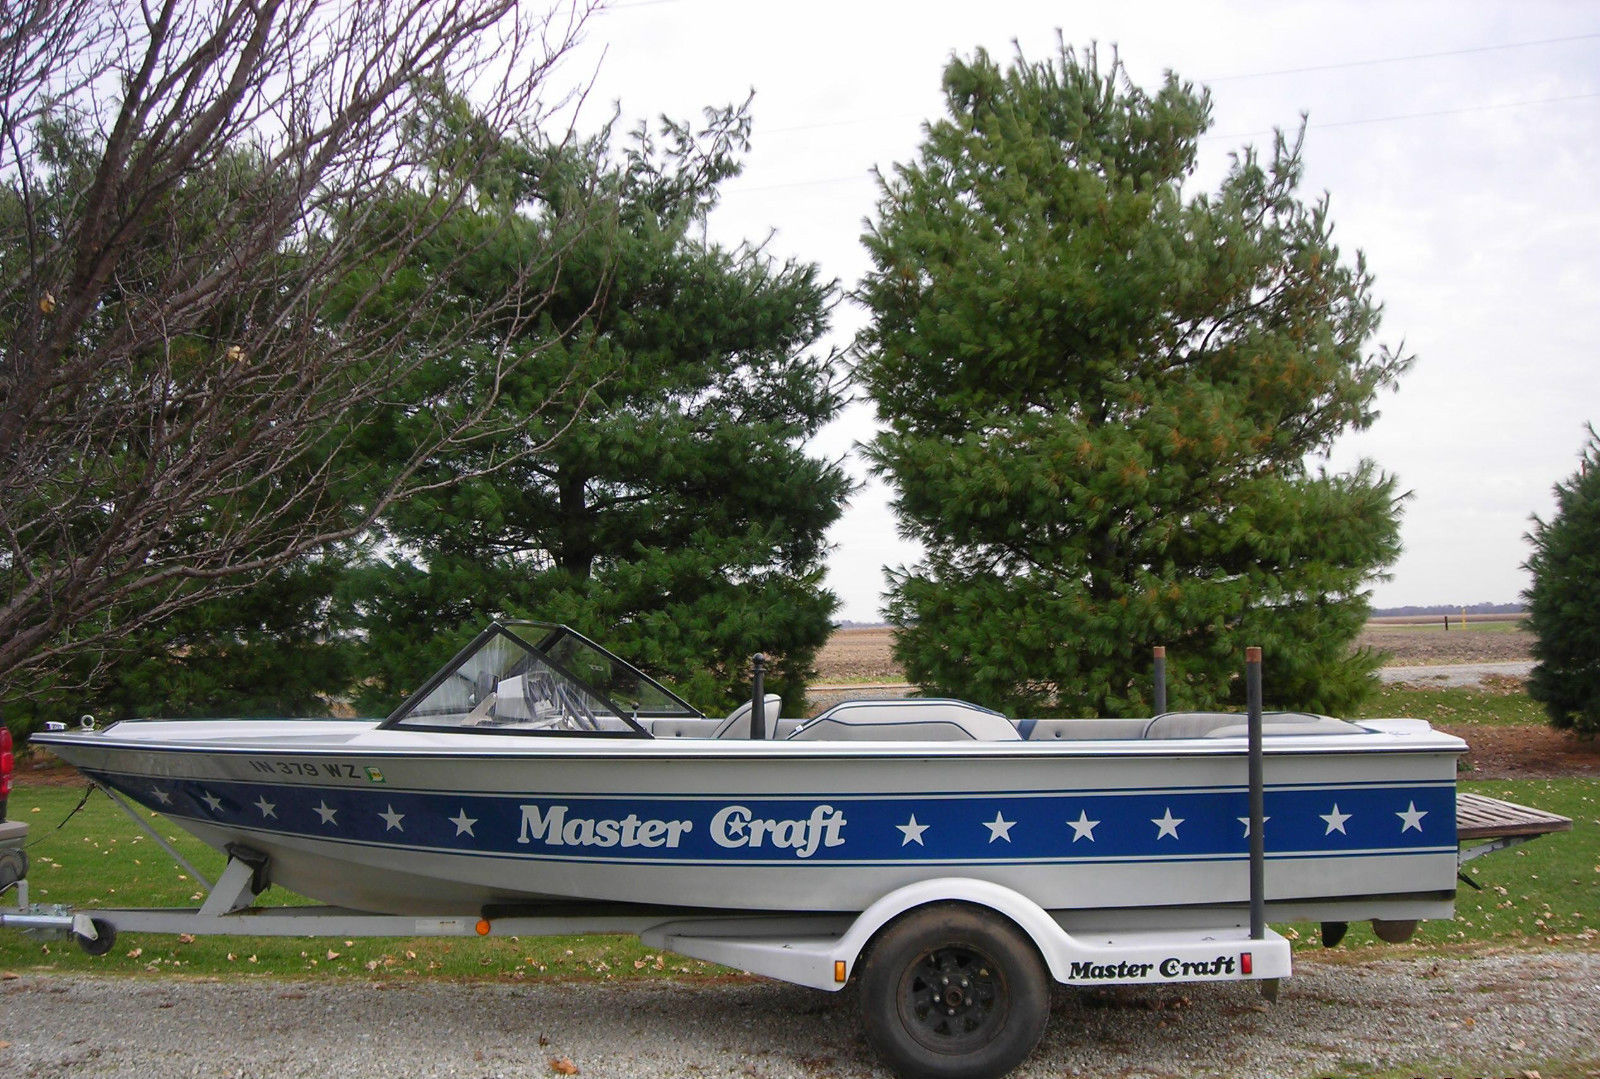 Mastercraft Prostar 190 boat for sale from USA